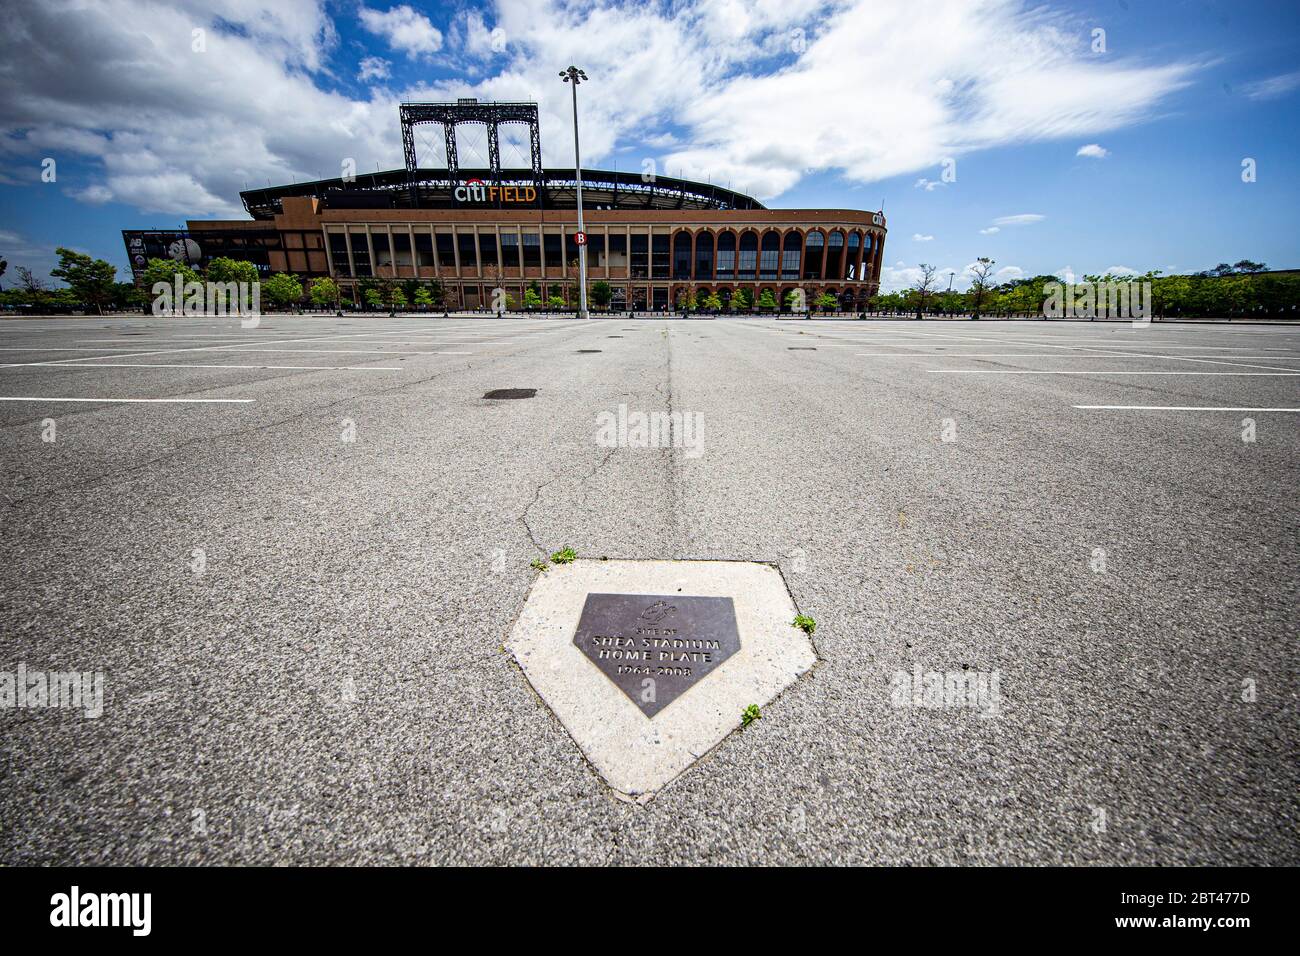 New York, N.Y/USA – 22nd May 2020: Markers showing Shea Stadium's home plate  in the lot of Citi Field. Credit: Gordon Donovan/Alamy Live News Stock  Photo - Alamy